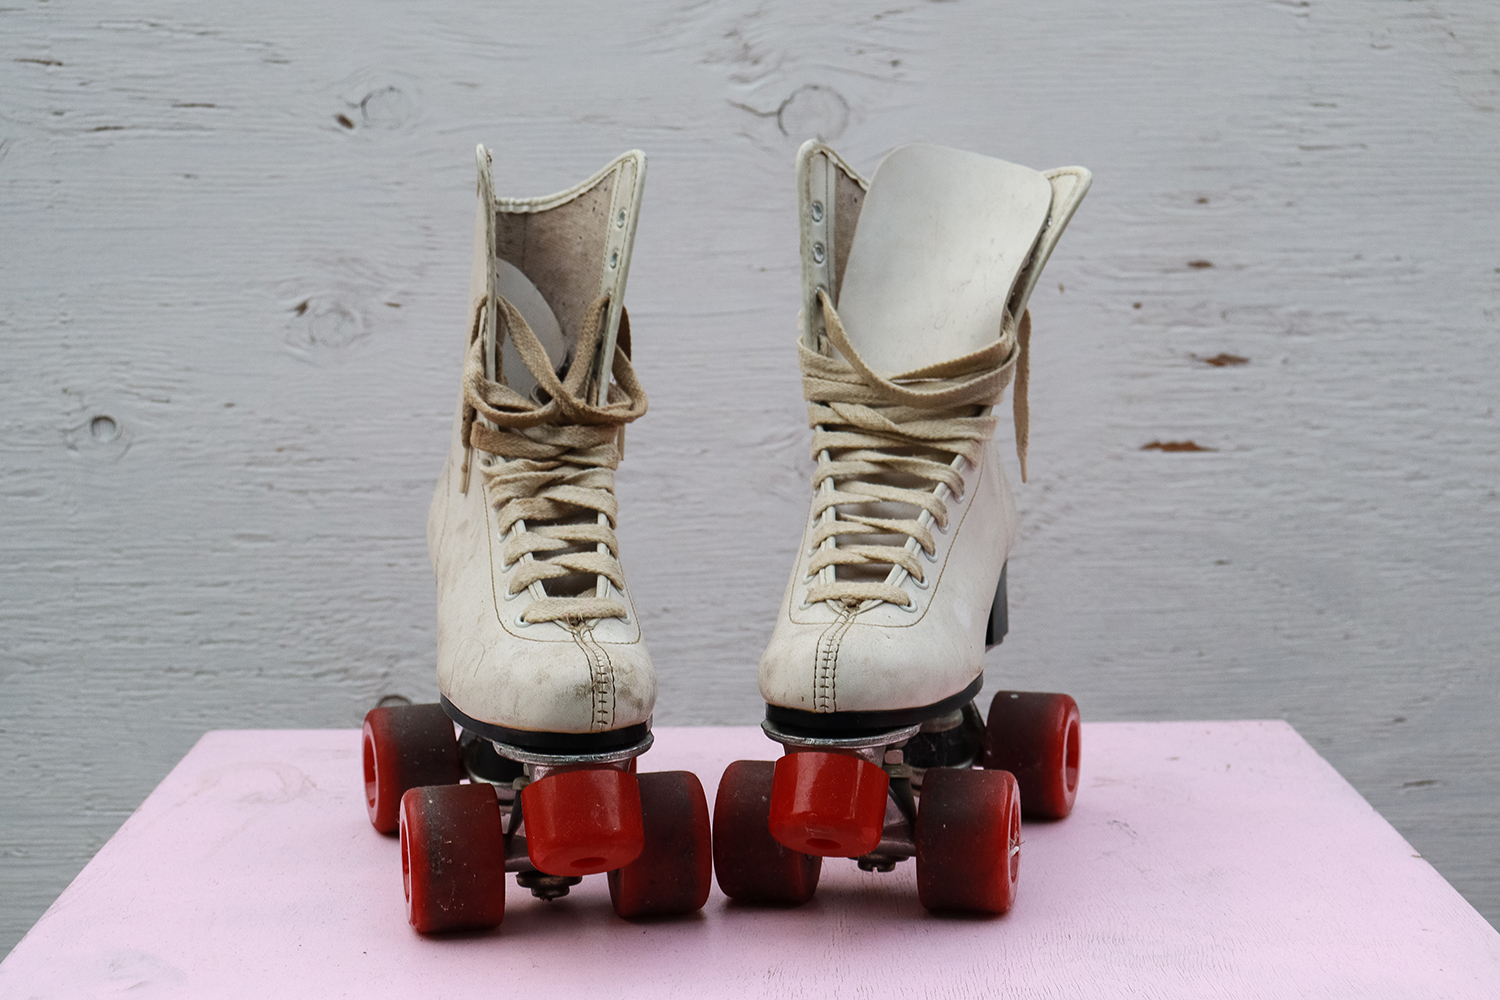 Roller skating is back in fashion and is more diverse than ever before, Sports